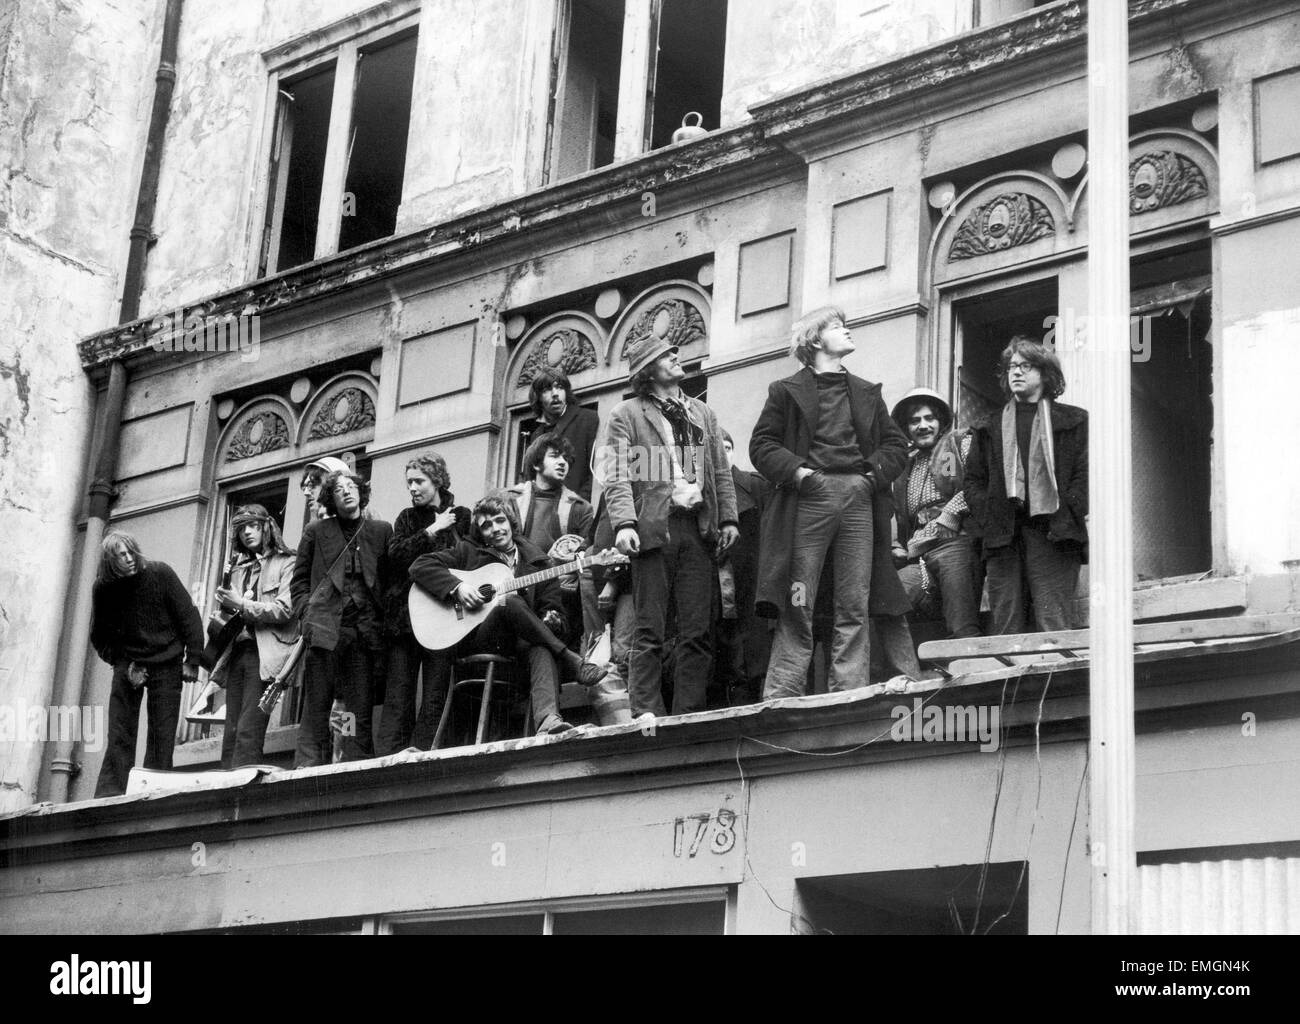 A group of 'Human Rights' sqautters singing We Shall Not Be Moved from the balcony of a derelict hotel they have occupied in London's Drury Lane. They were eventually evicted by a group of demolition workers under orders from the Greater London Council. 27th March 1969. Stock Photo